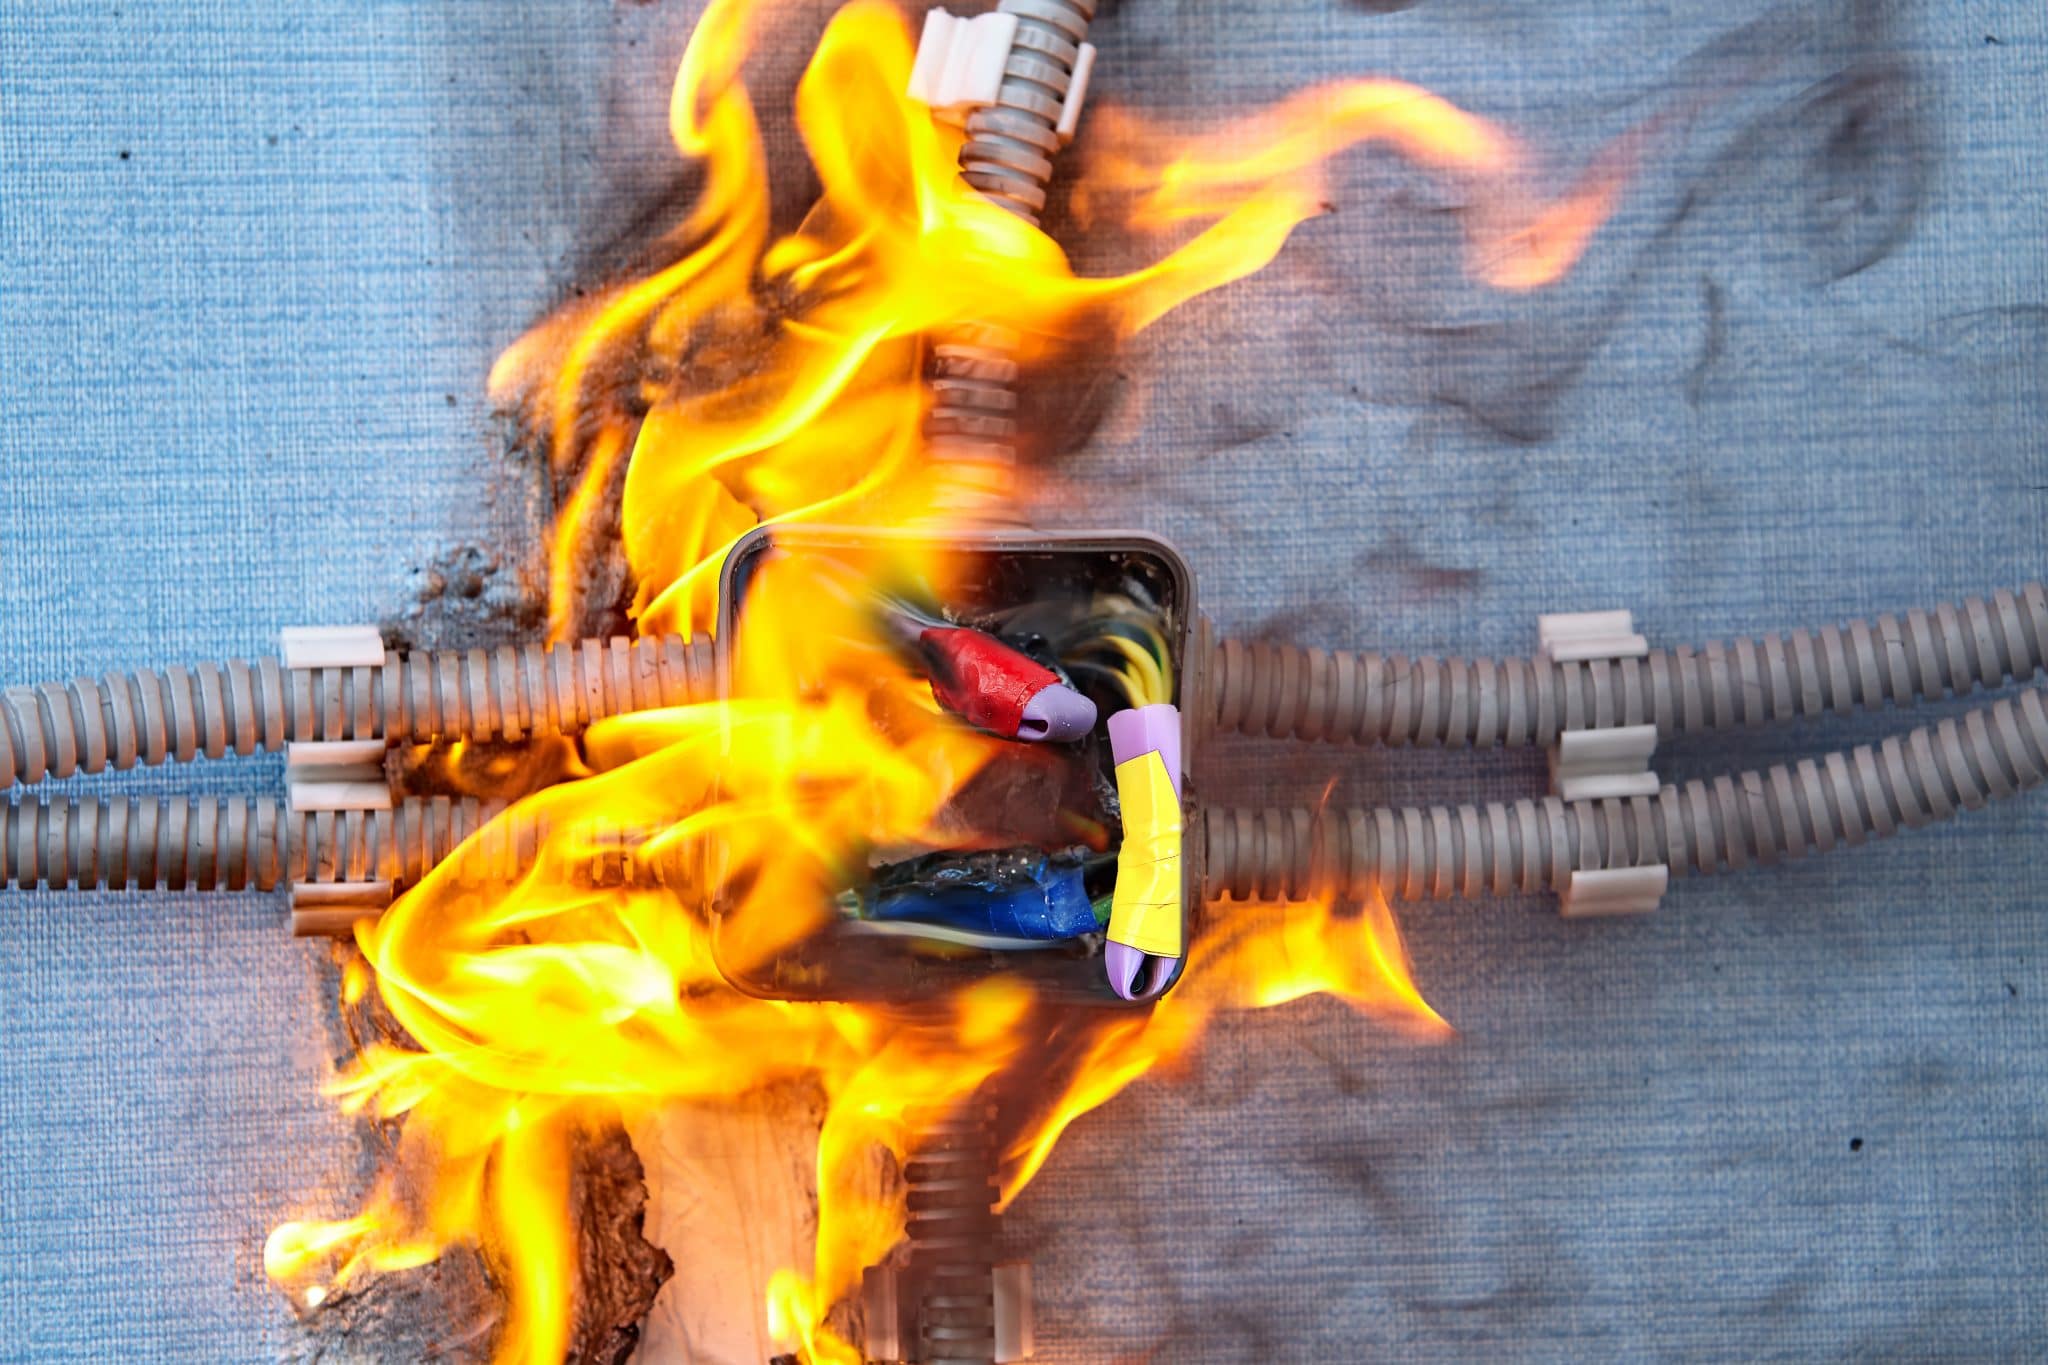 research on electrical fires the state of the art